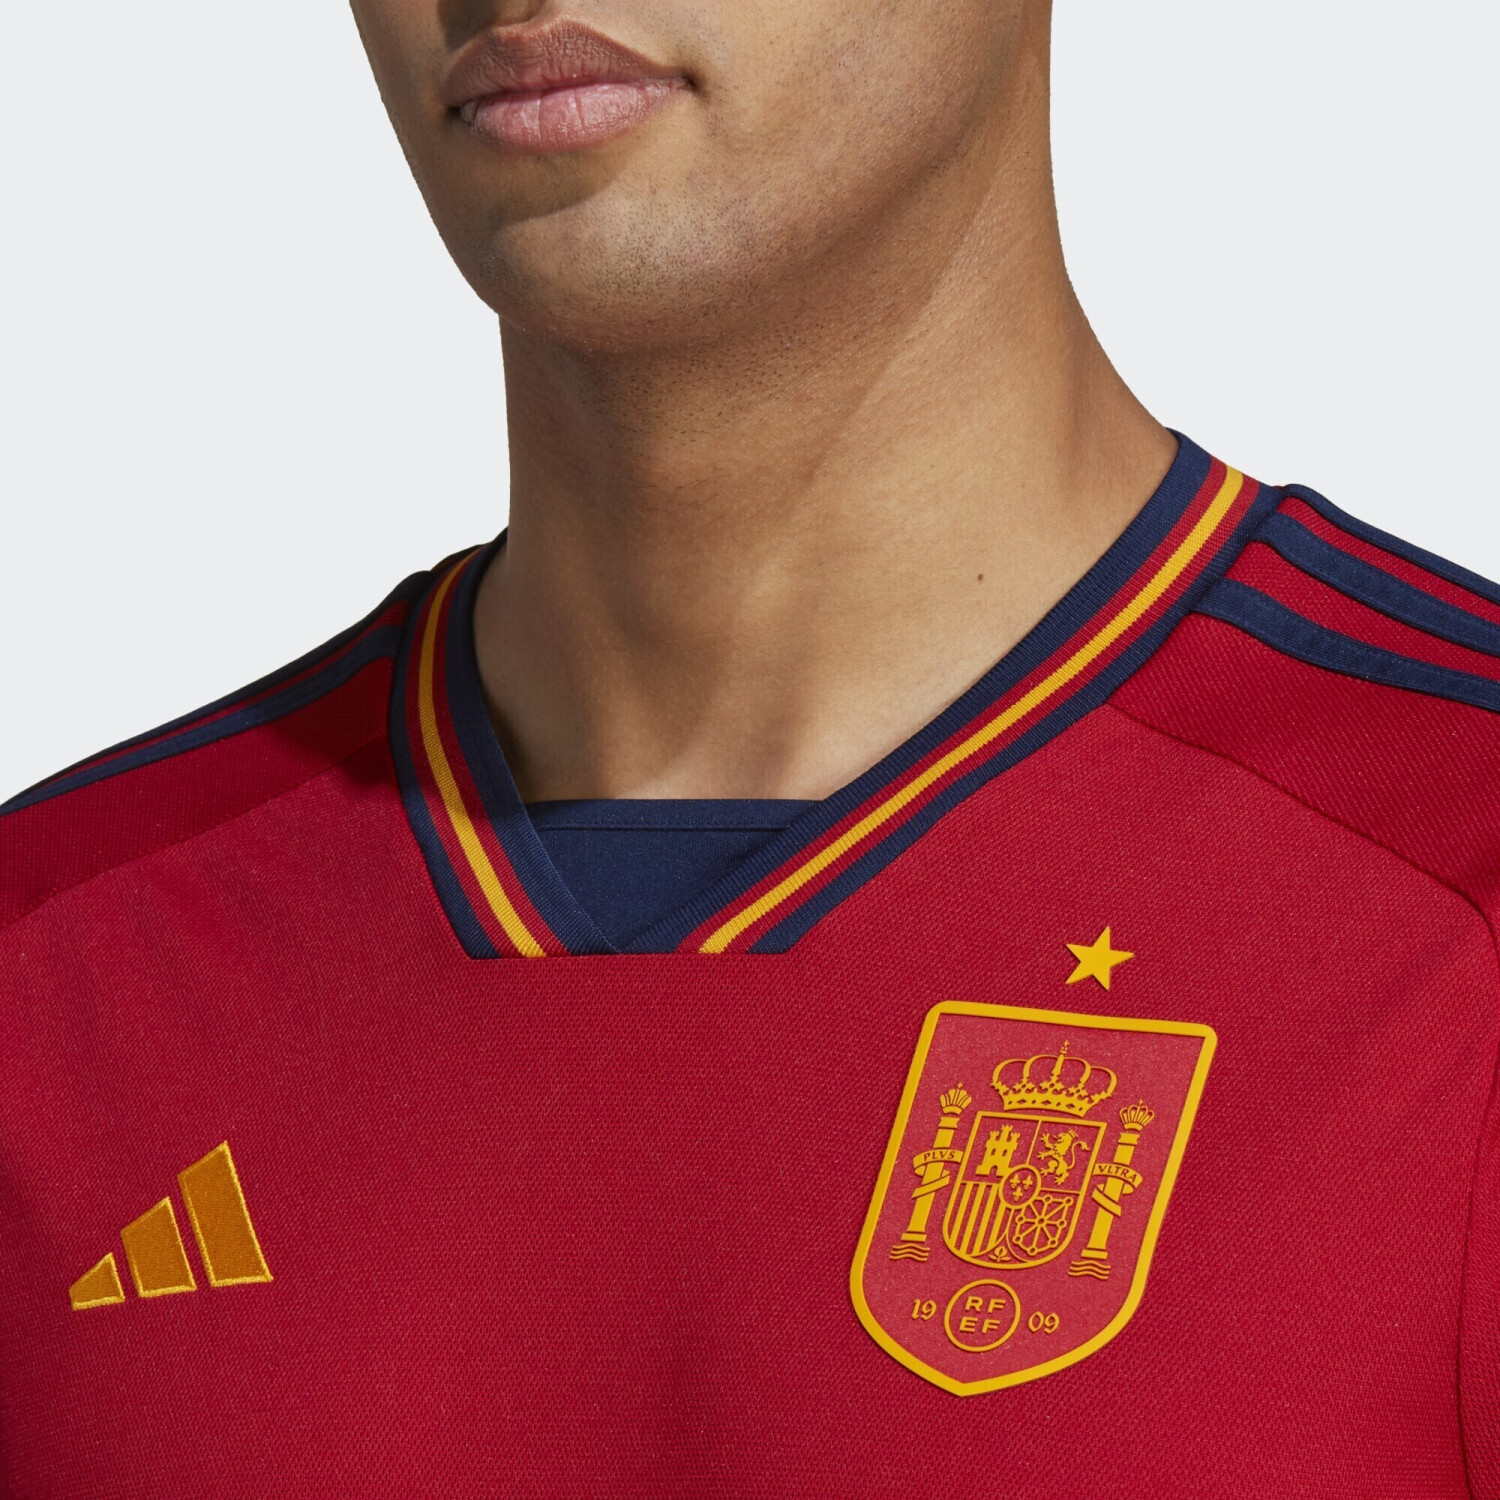 spain world cup jersey 2022